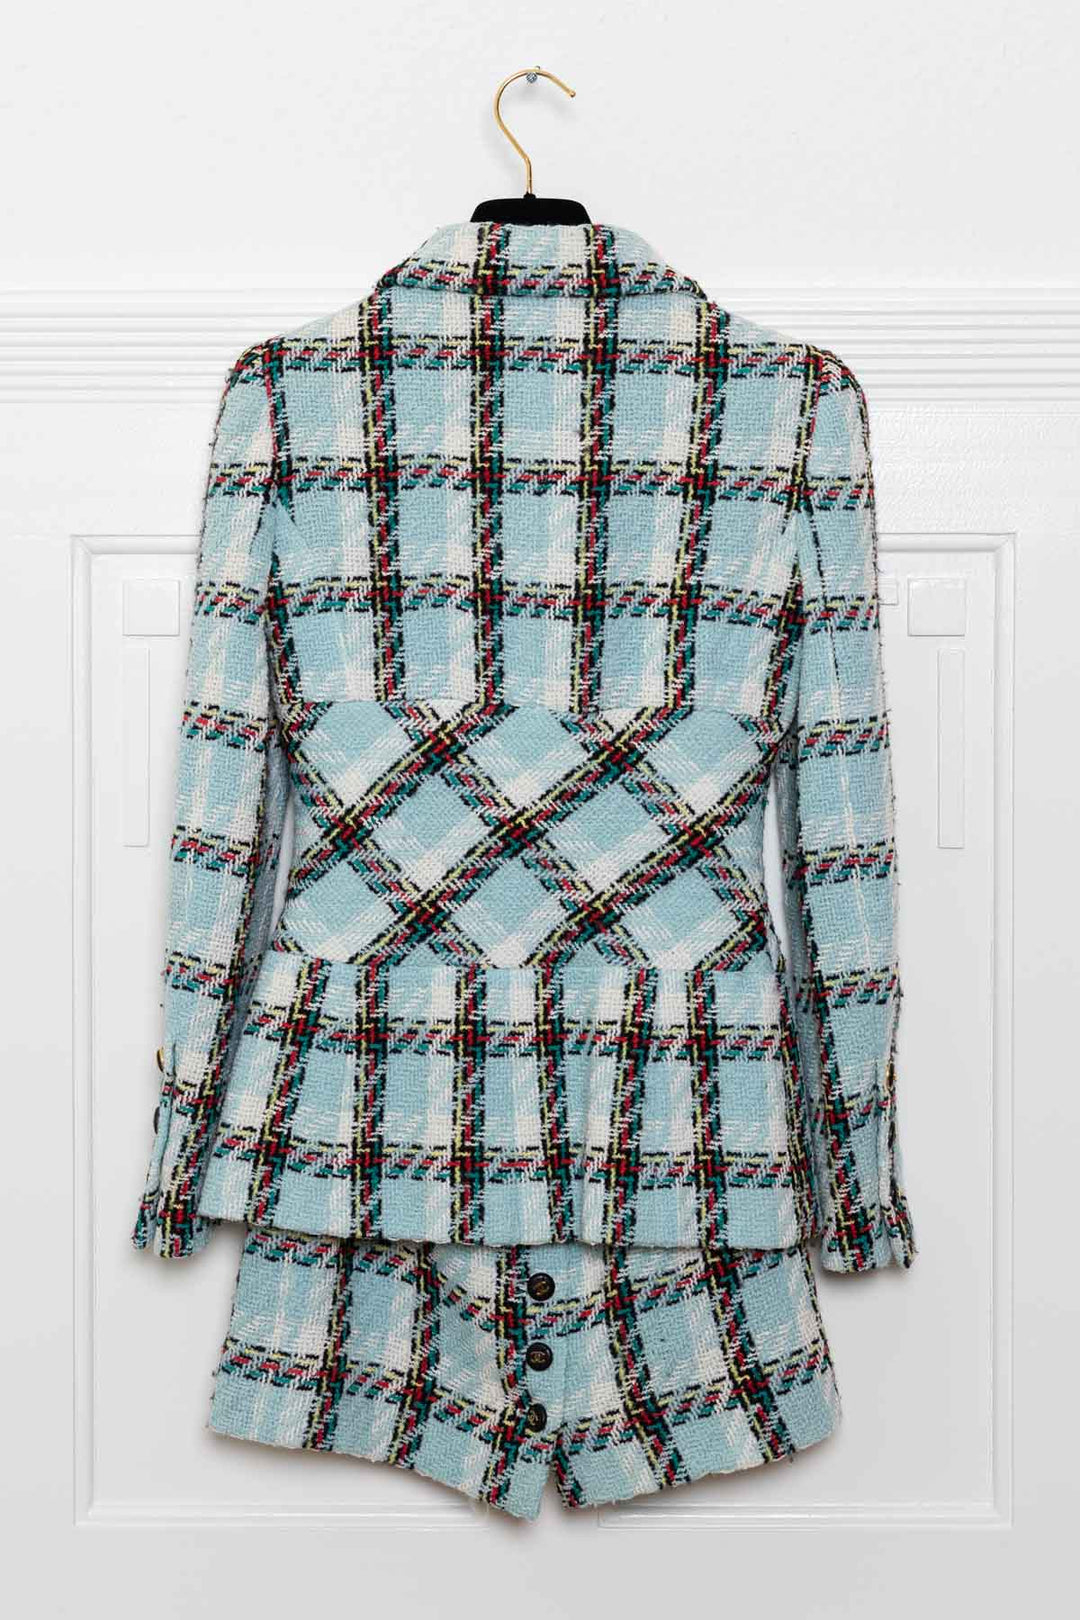 CHANEL S95 Two Piece Tweed Baby Blue Check